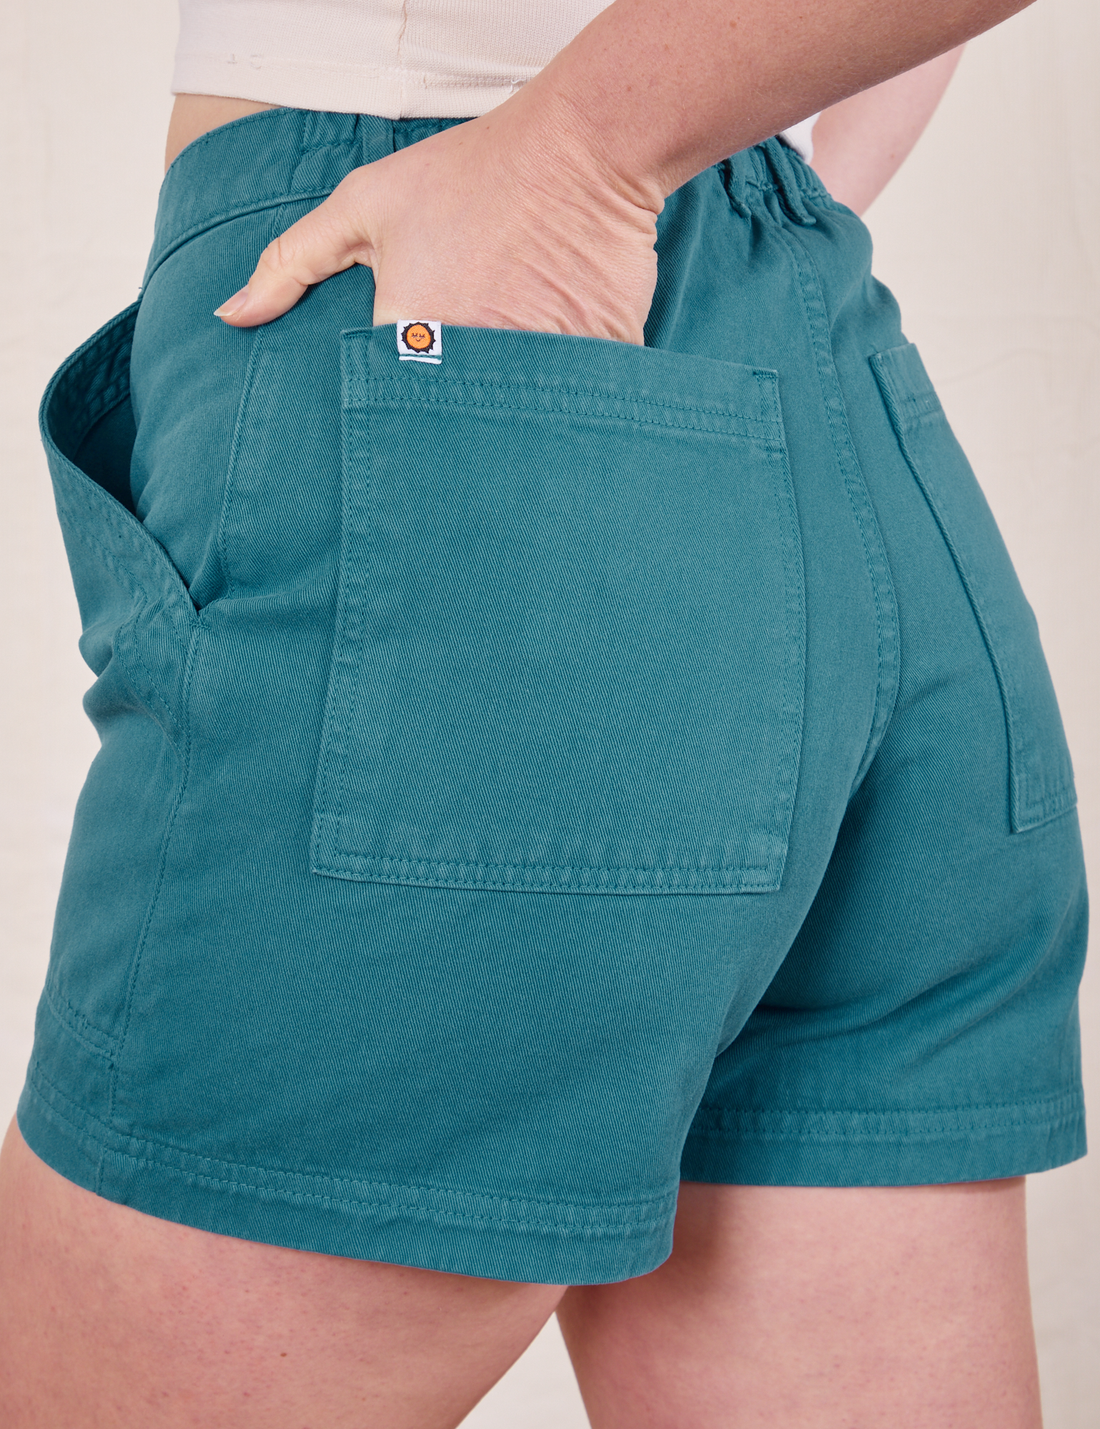 Back pocket close up of Classic Work Shorts in Marine Blue. Allison has her hand in the back pocket.